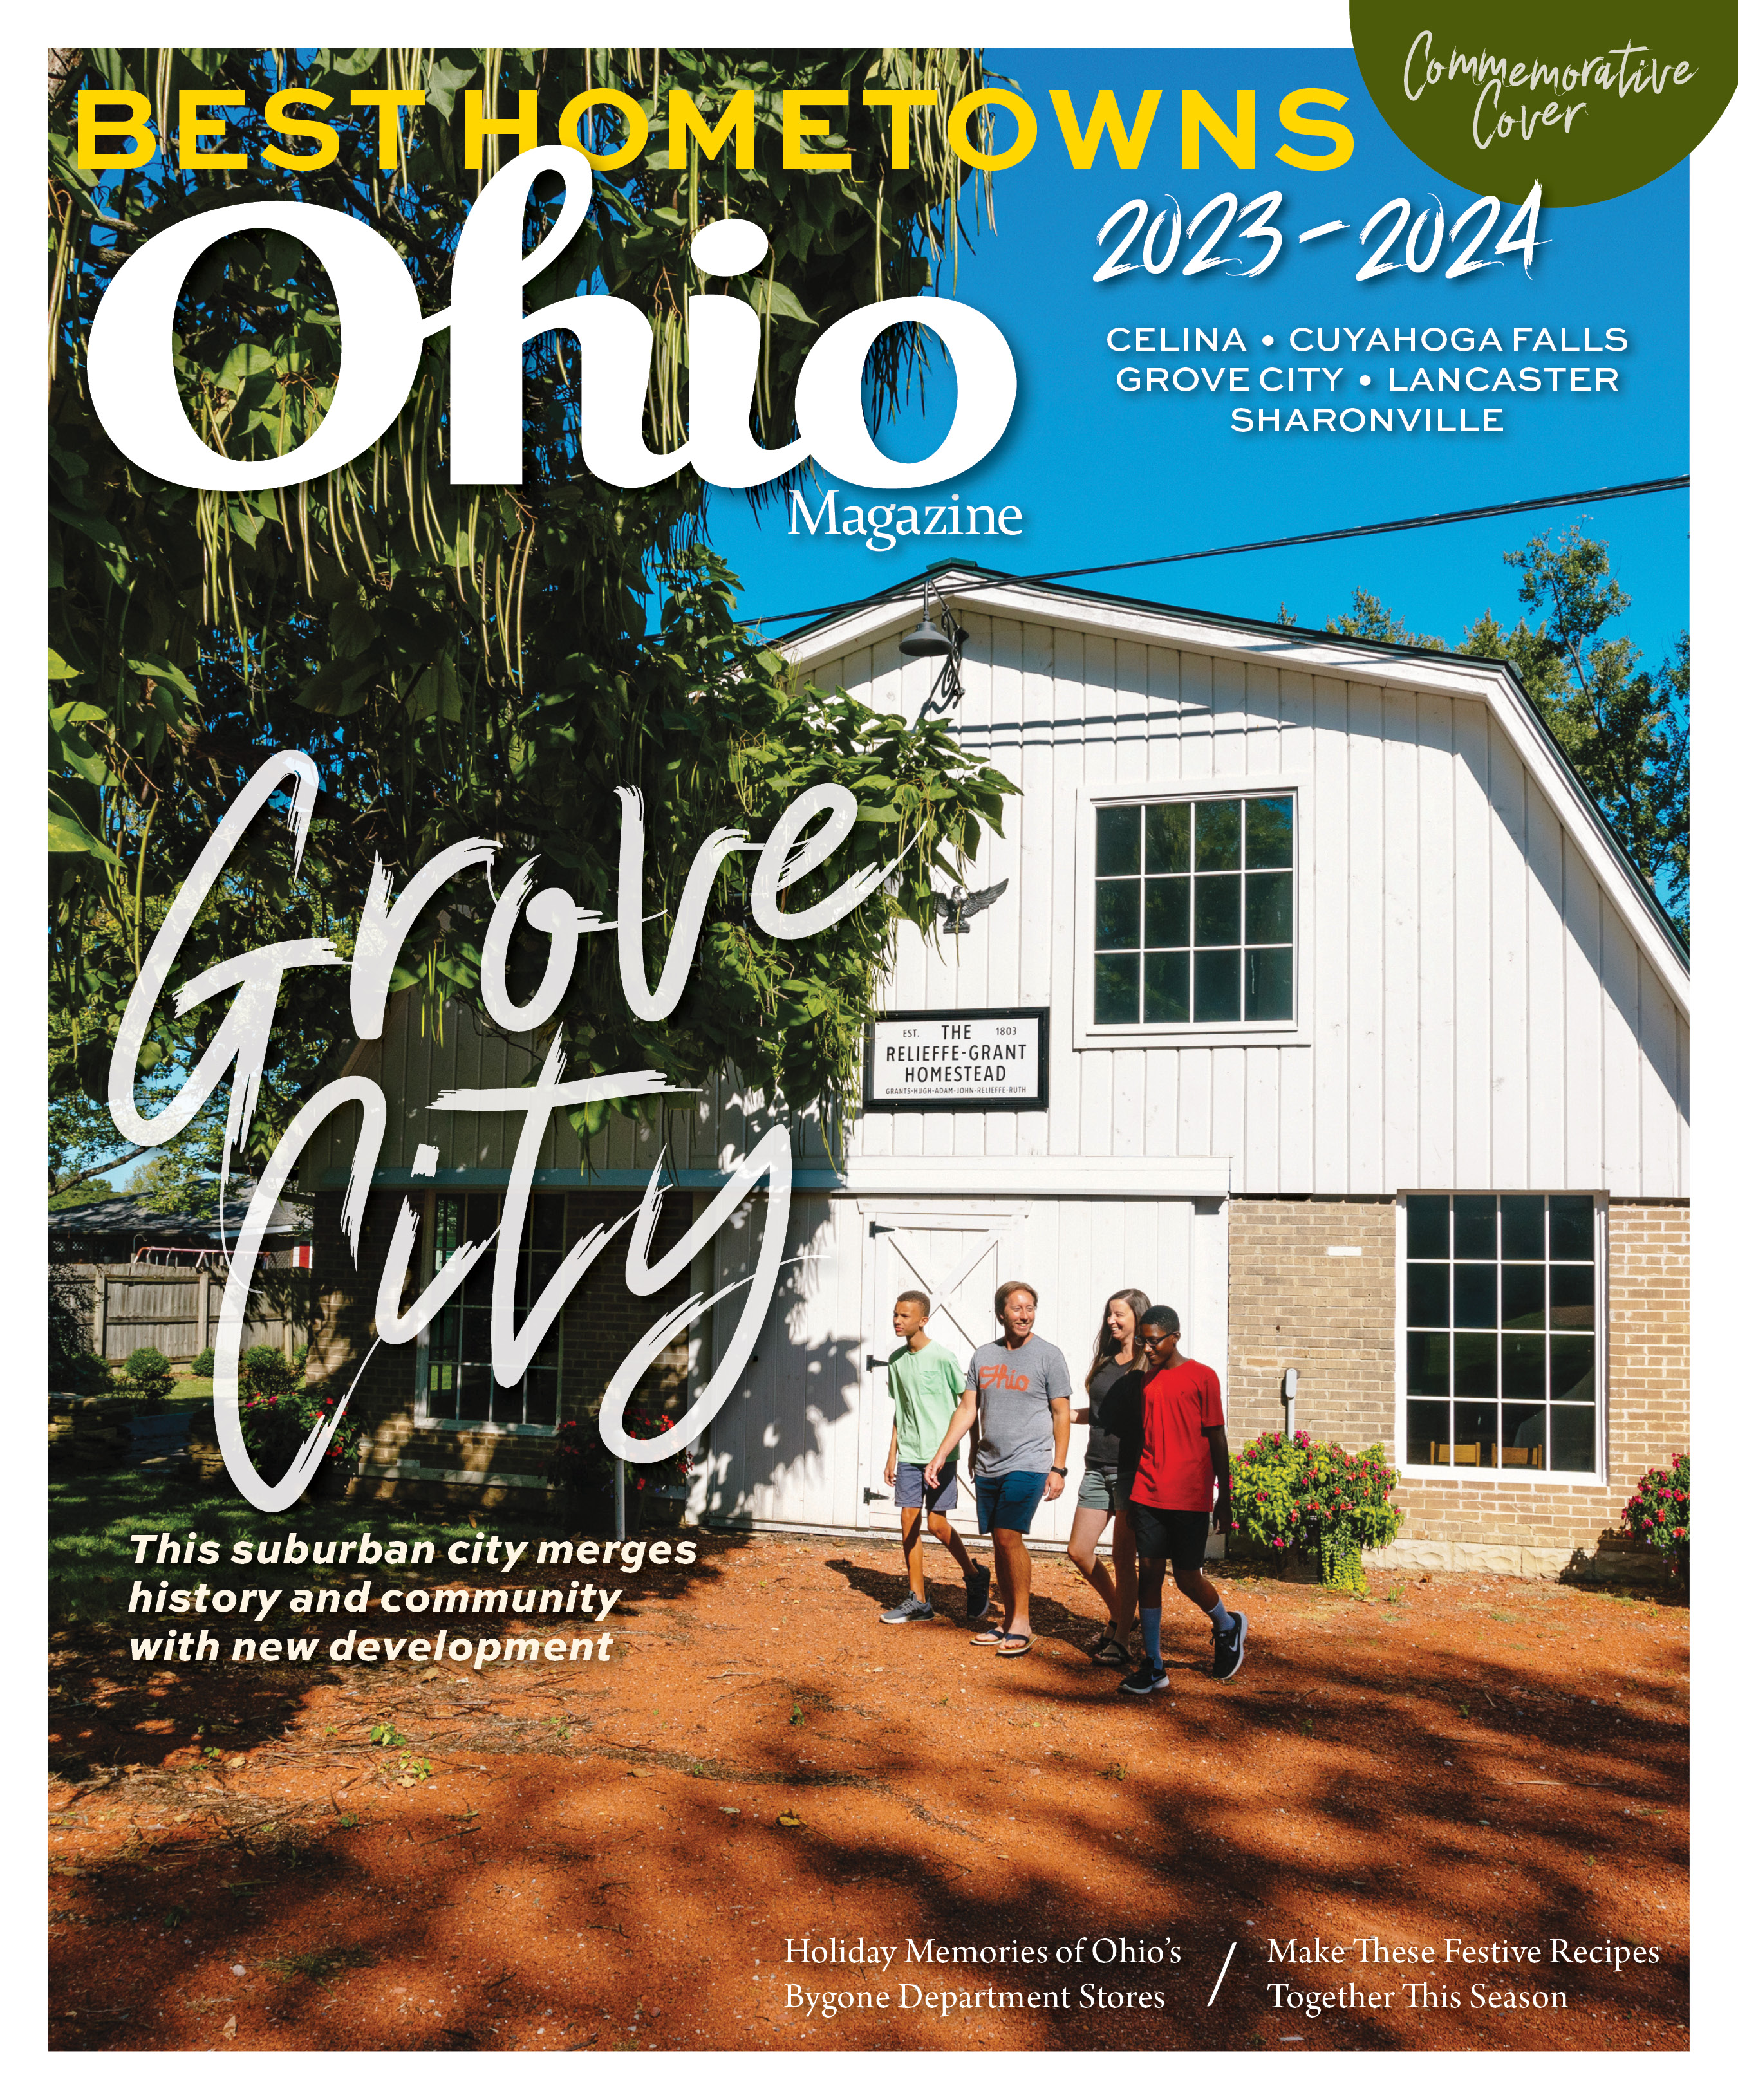 Best Hometowns 2023: Grove City Cover